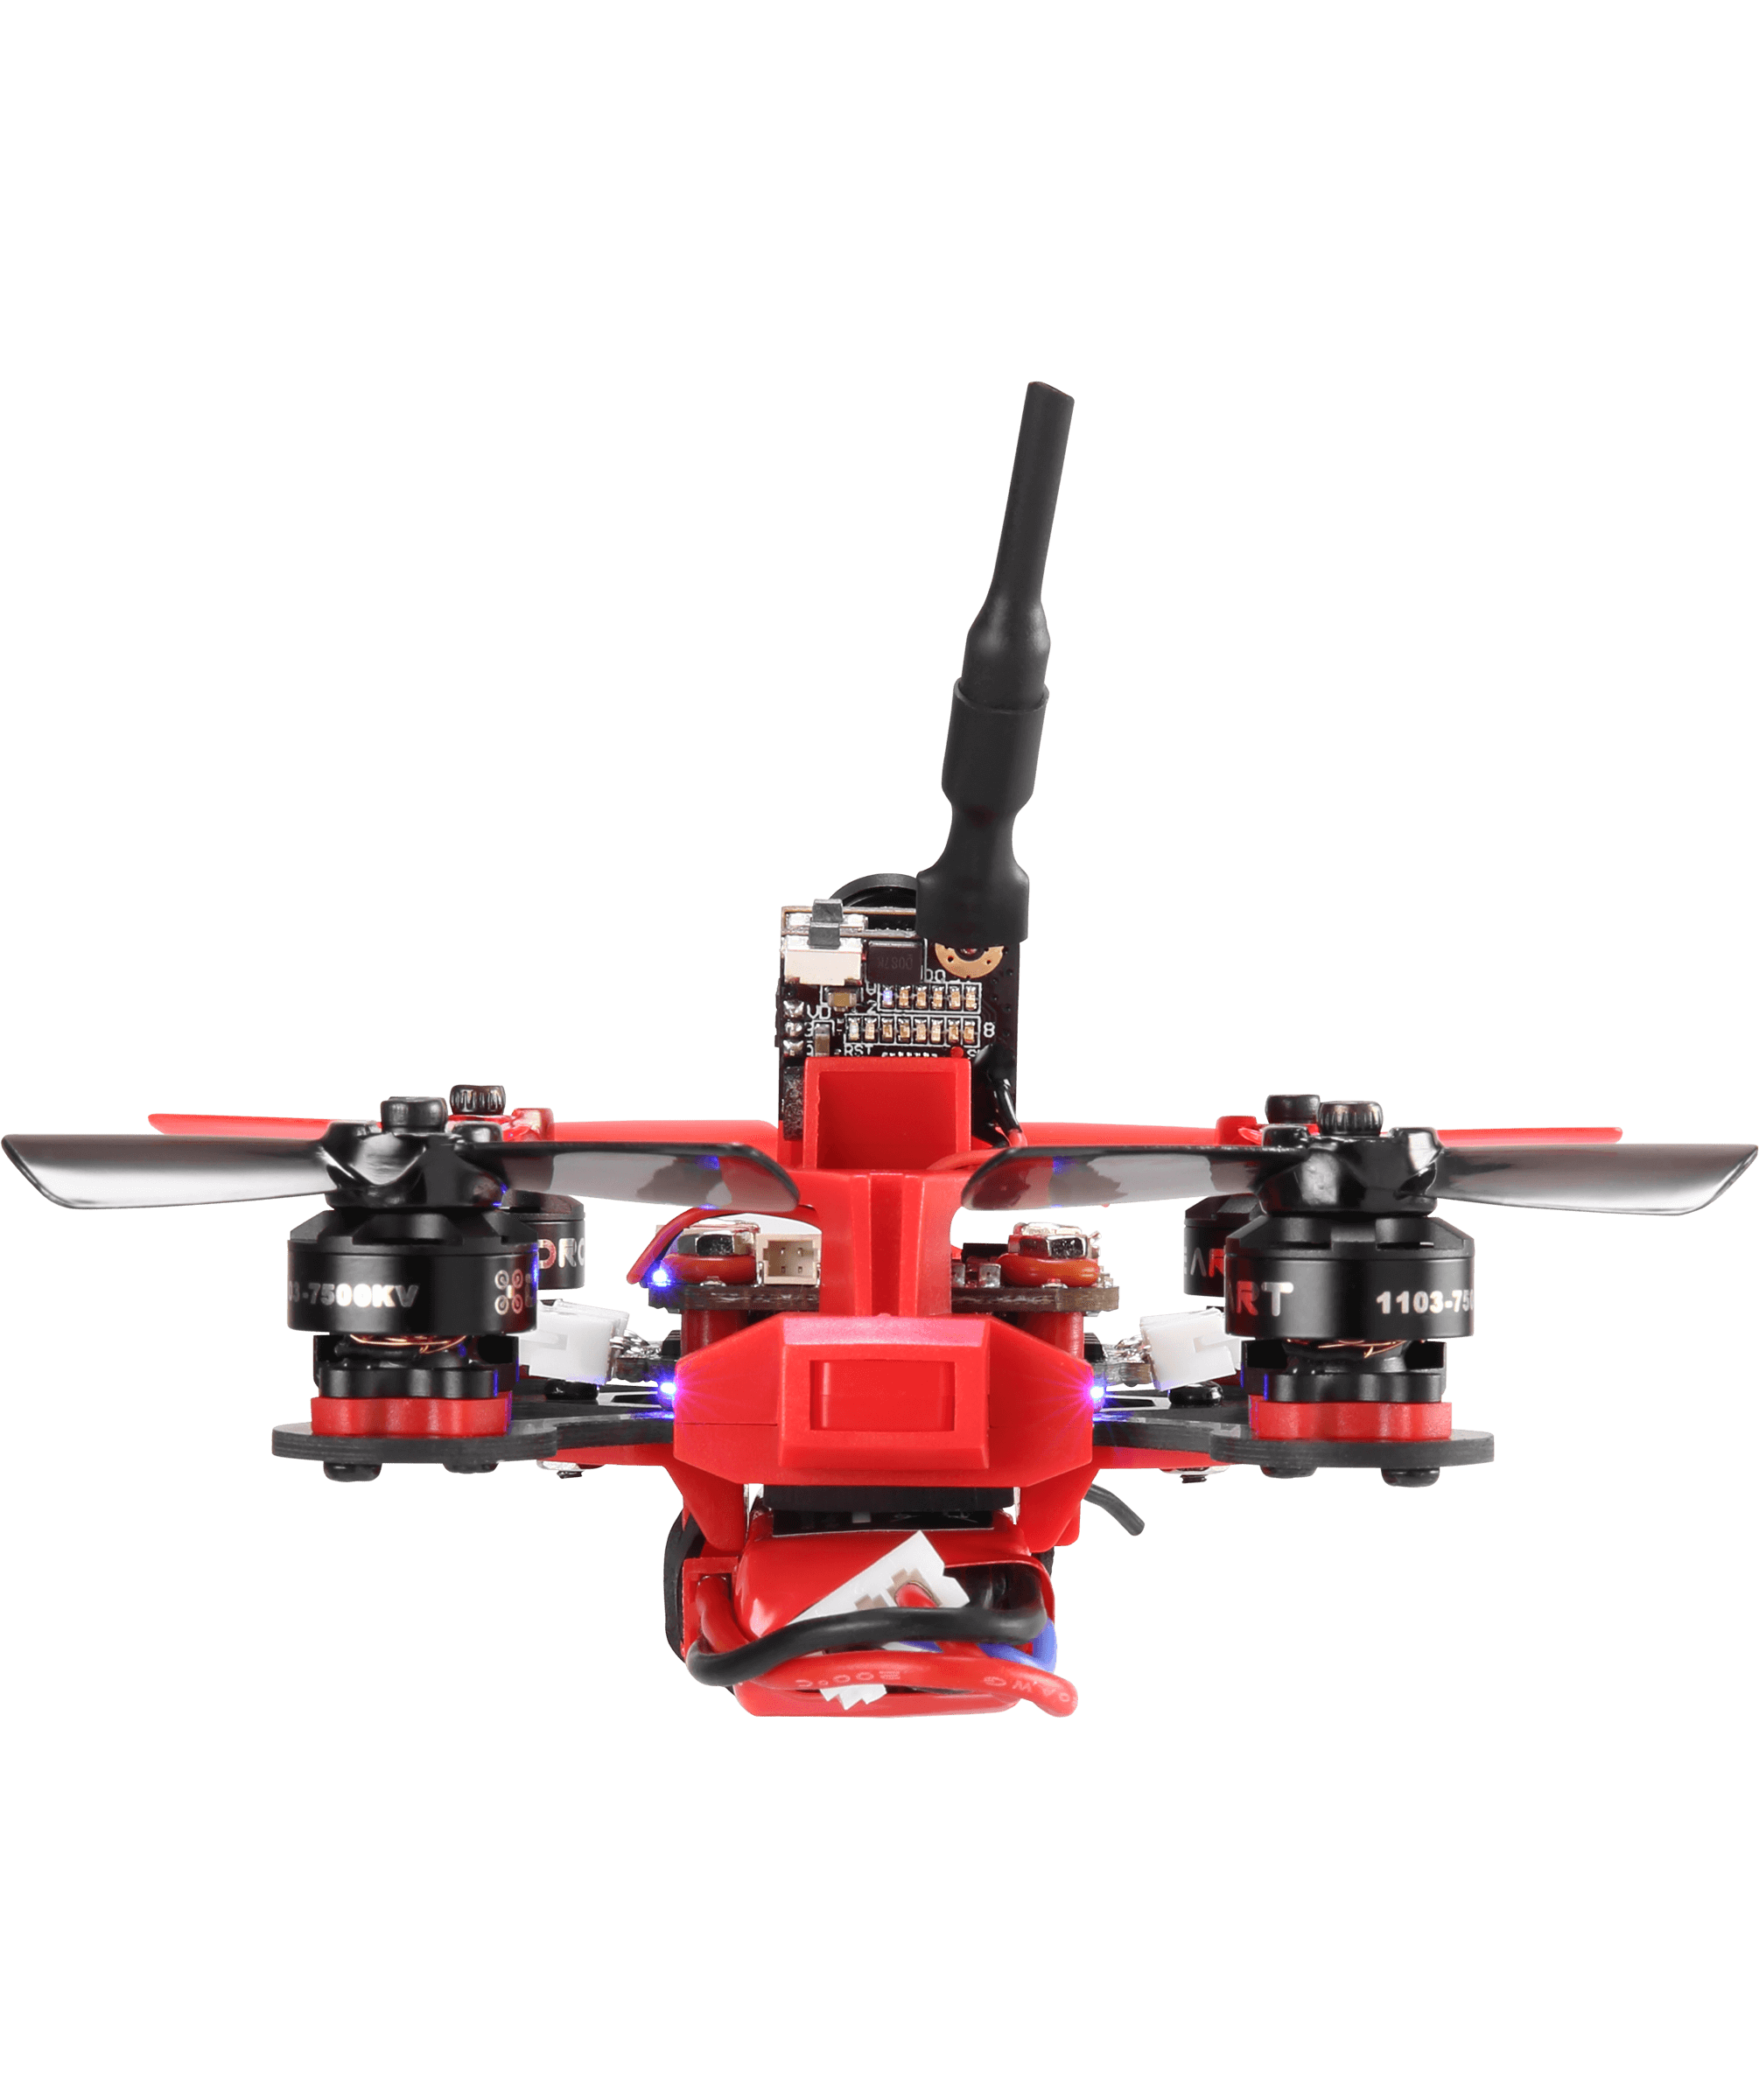 DroneArt RC Eye Imprimo Micro Drone Kit w/Built-In Spektrum Compatible Rx